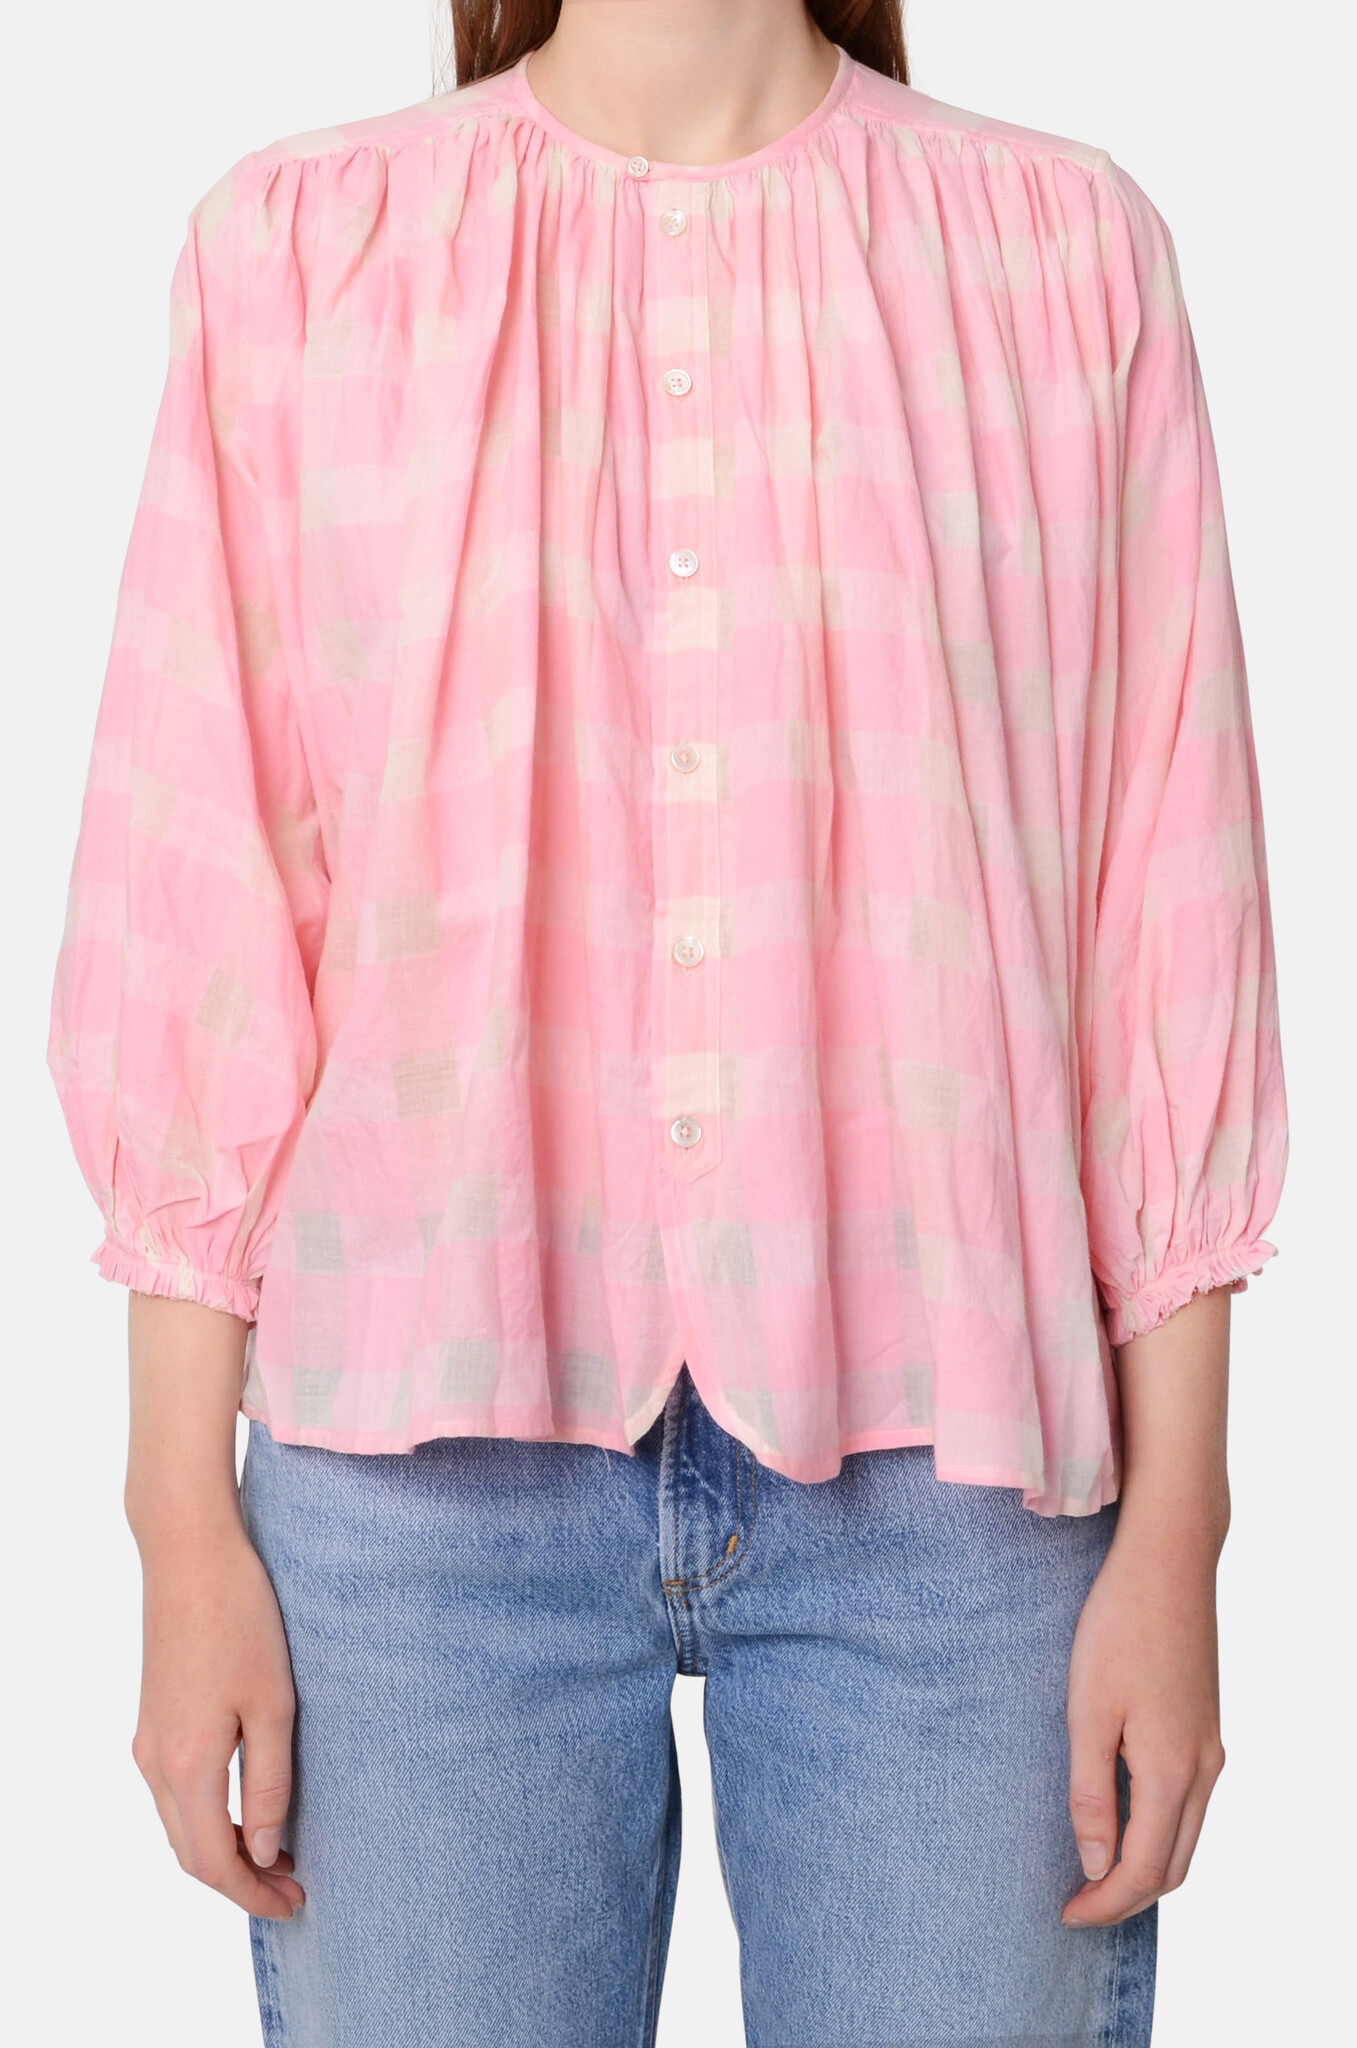 Cigarbox Blouse in Pink Gingham-1